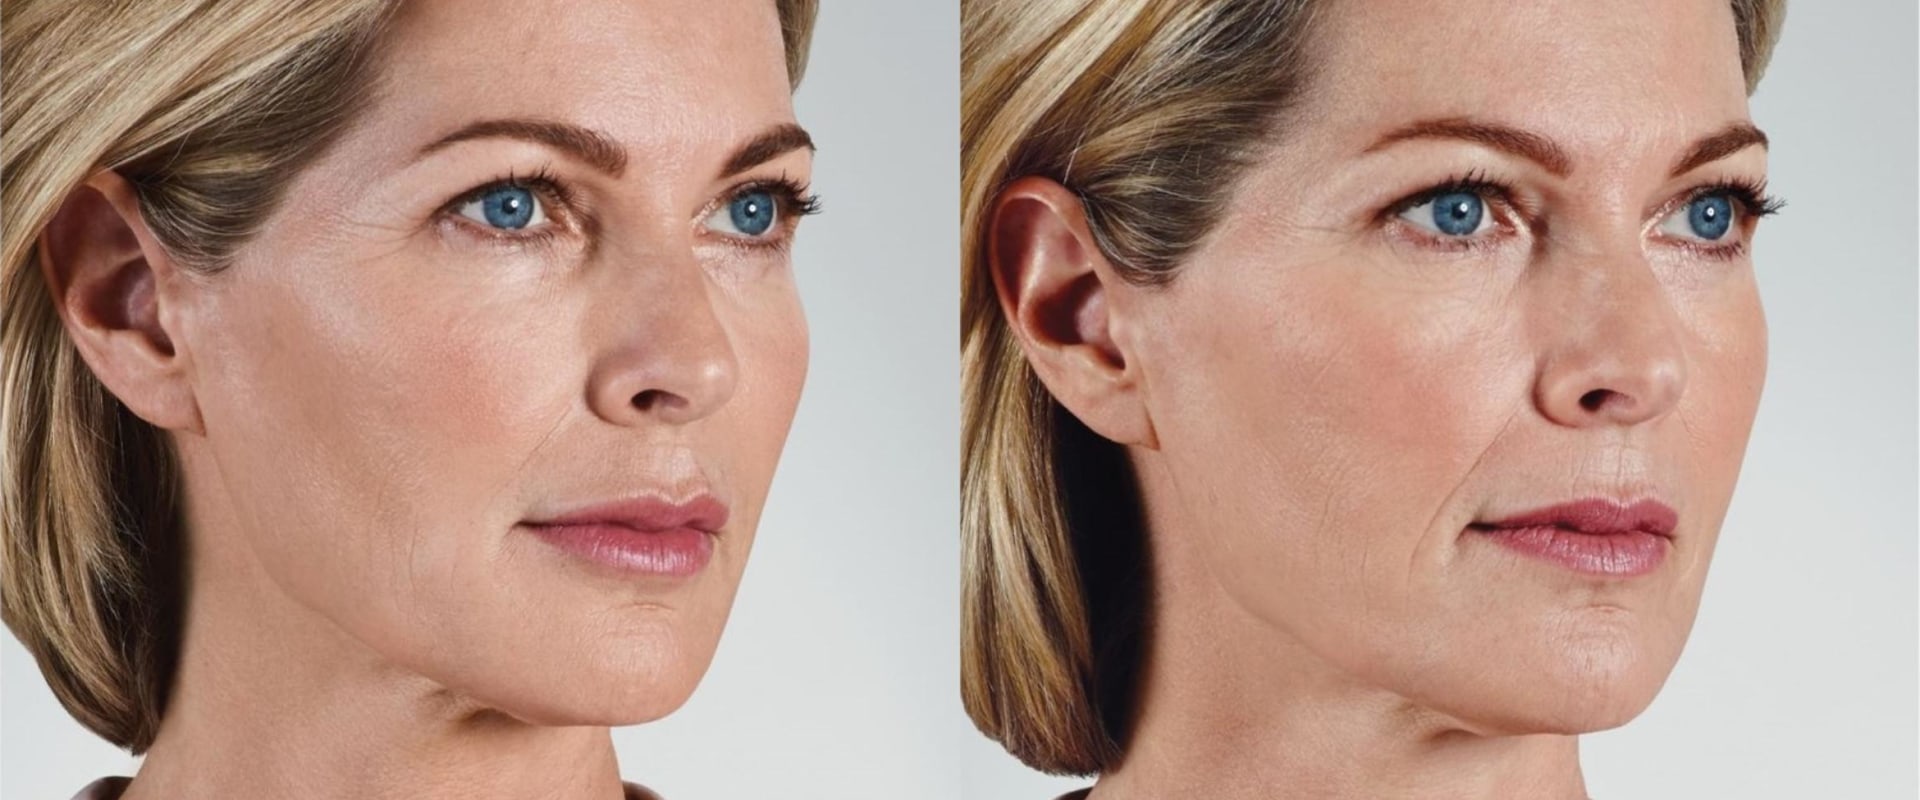 Can Juvederm Help You Get Rid of Glabellar Lines?